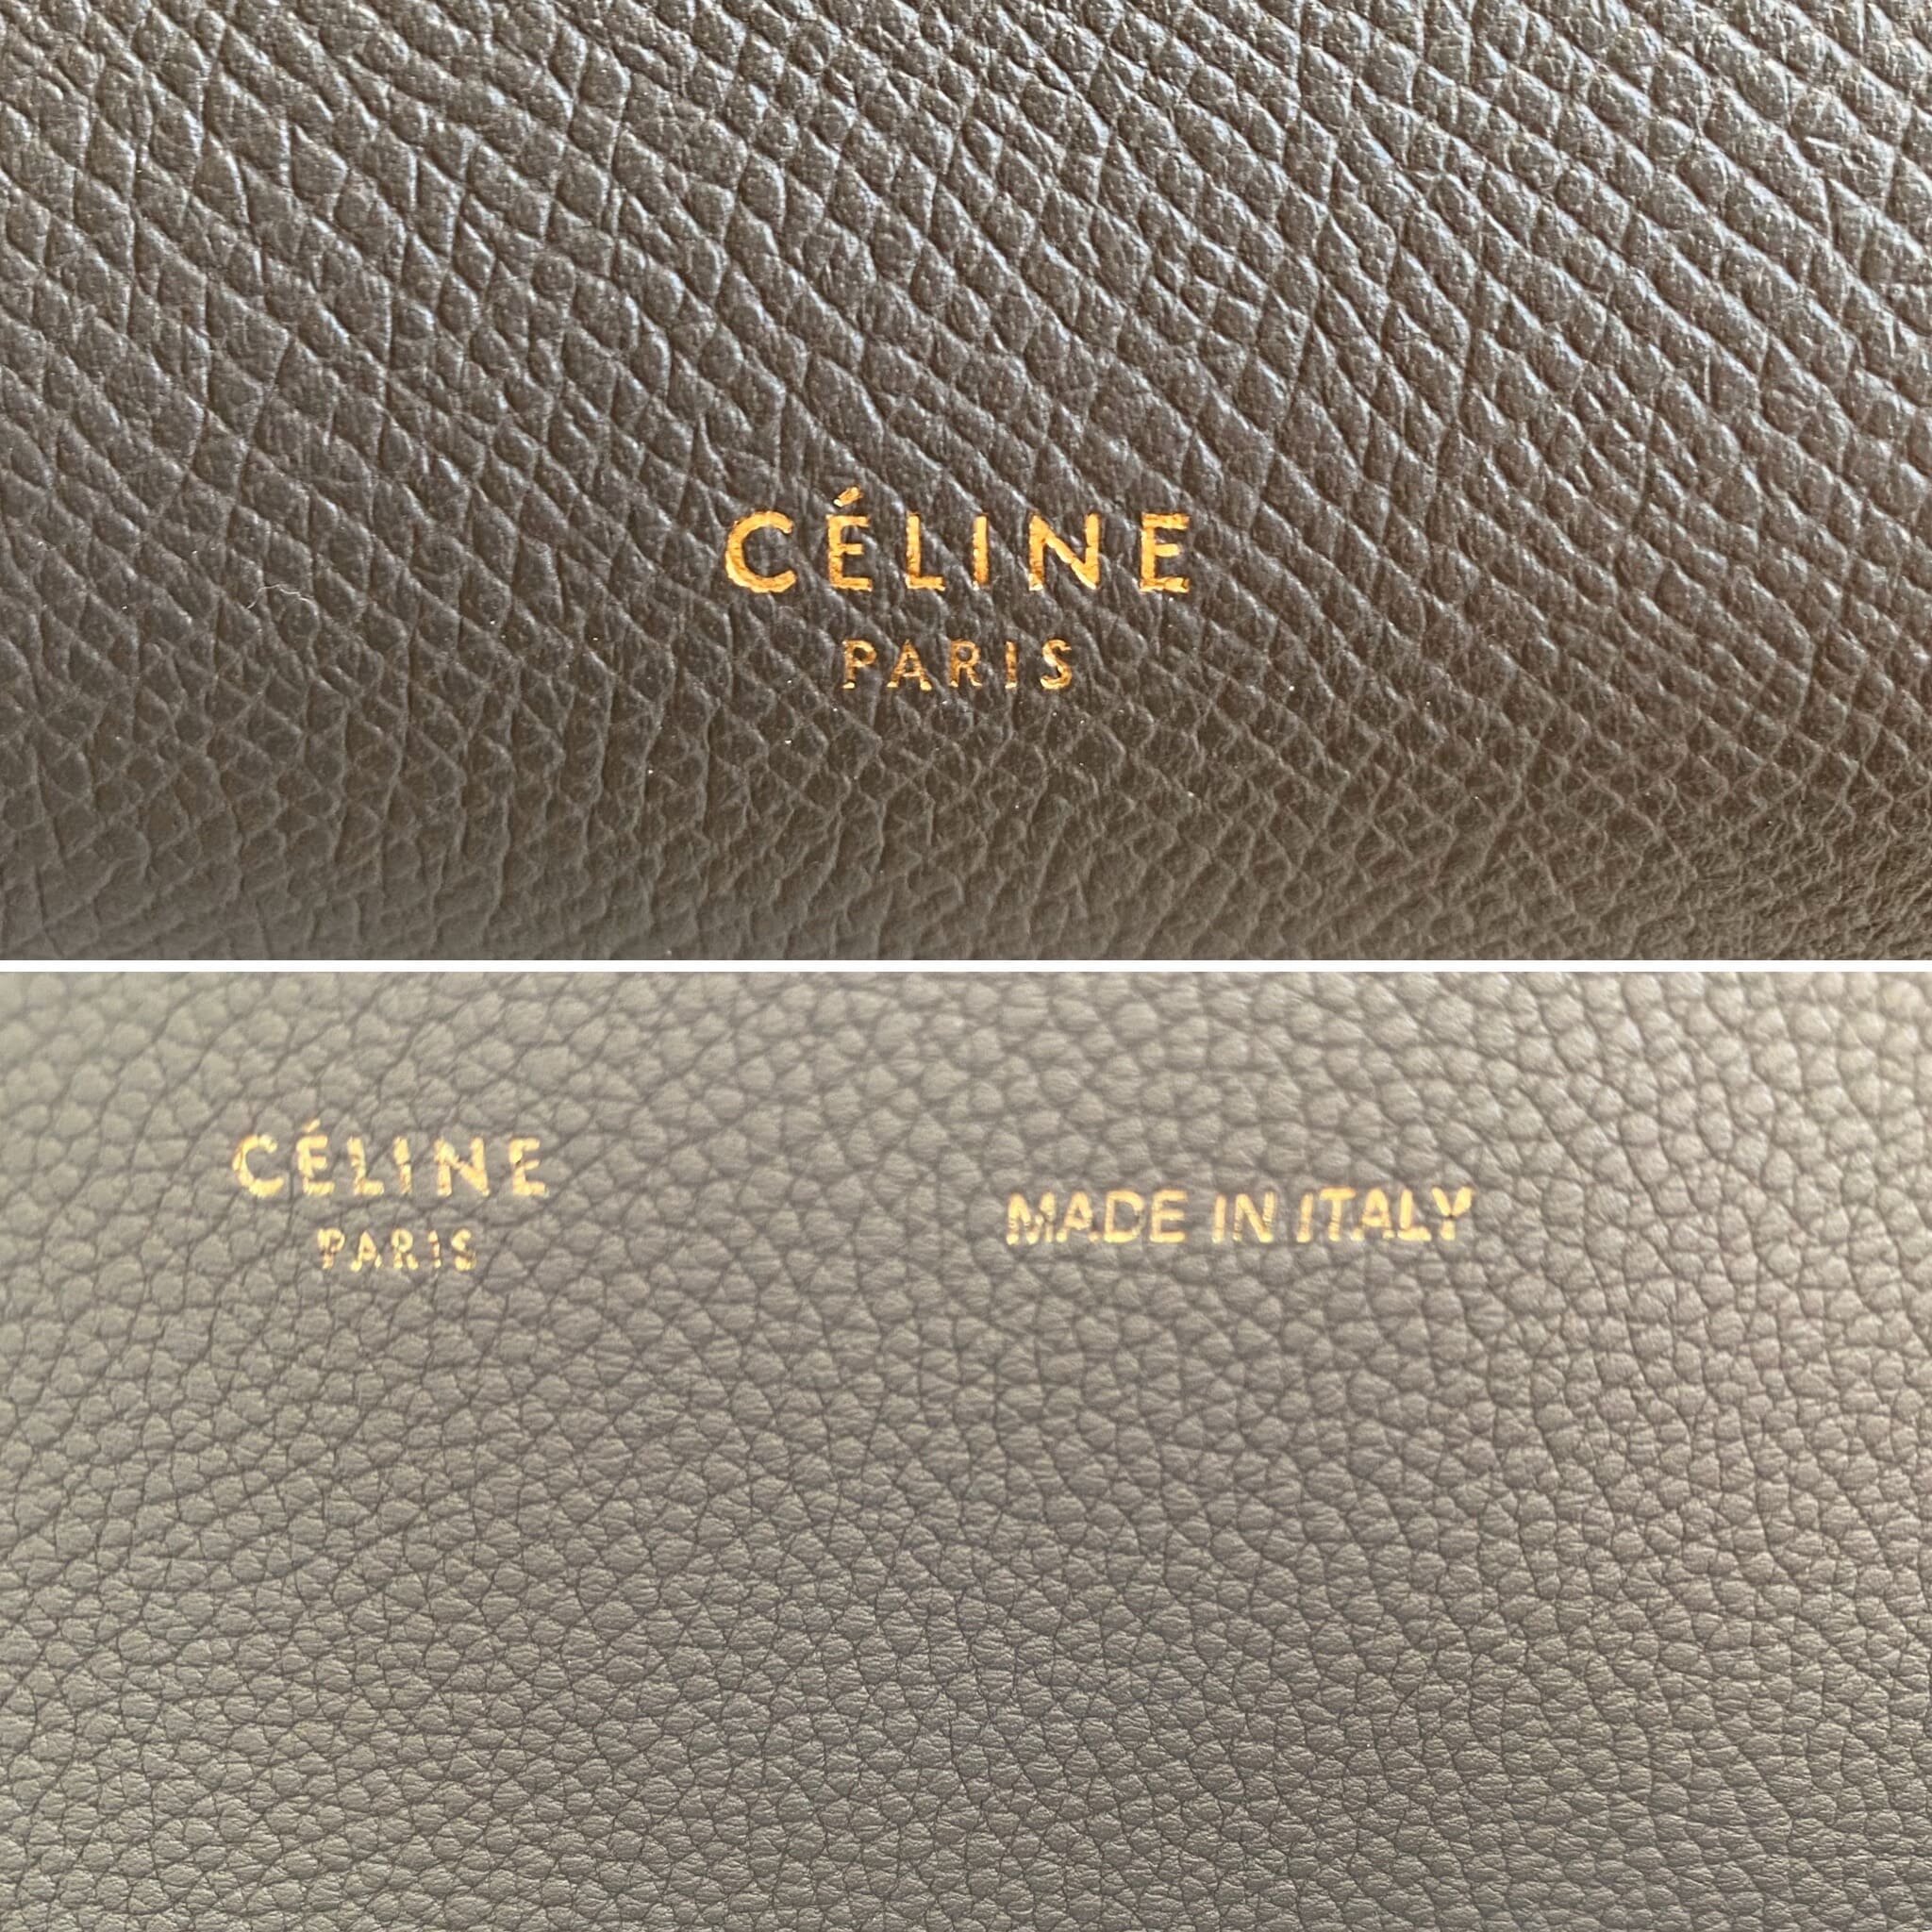 How To Authenticate A Celine Handbag - Is Your Bag Real? Find out!